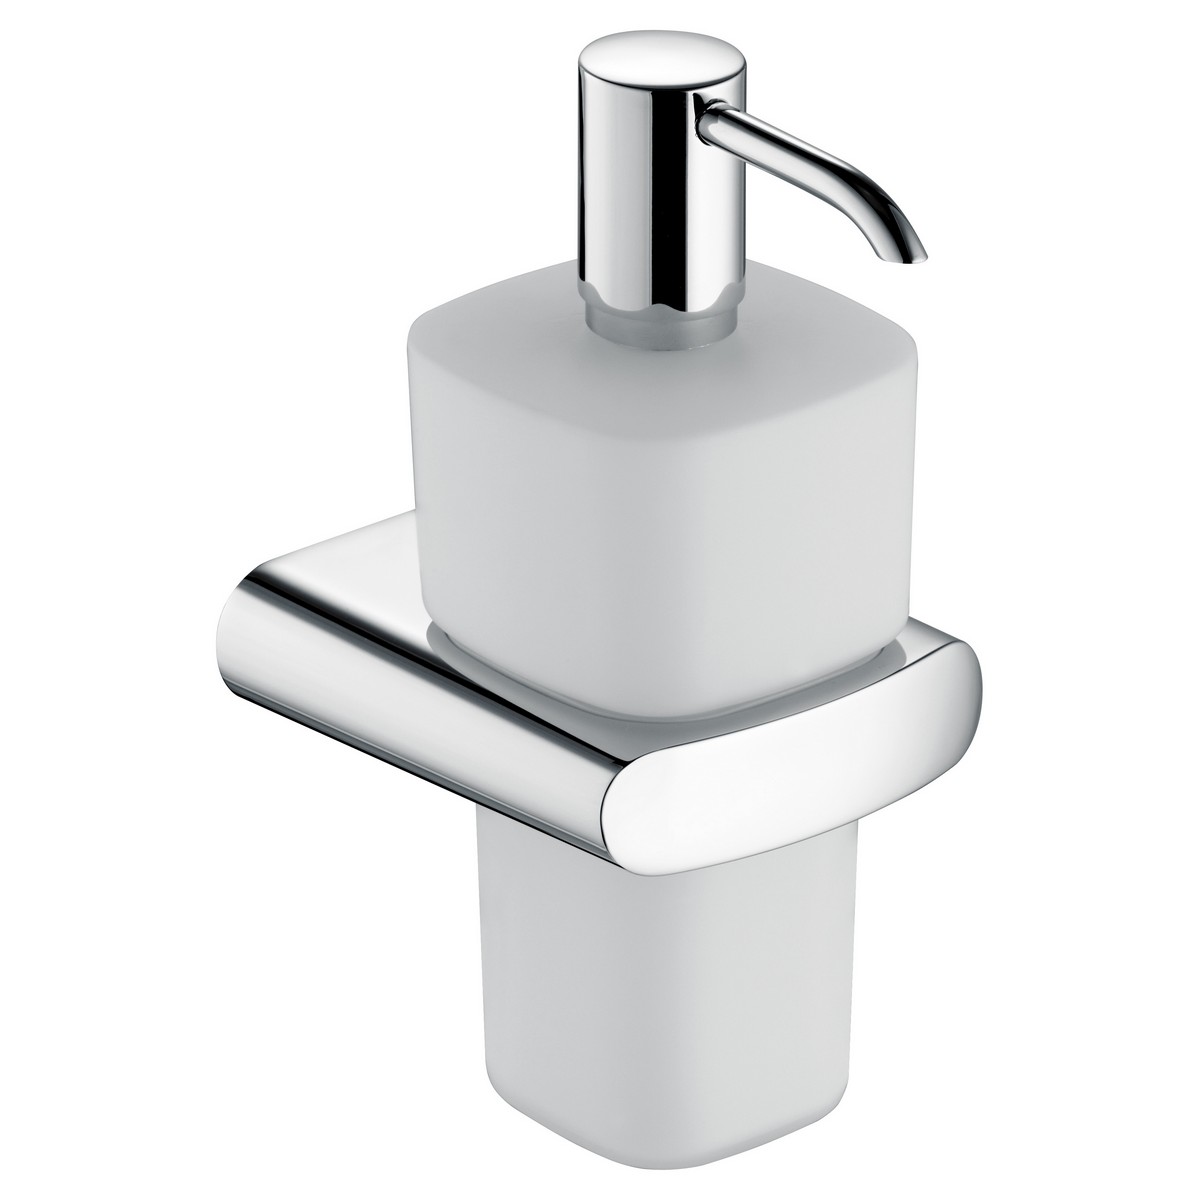 KEUCO 11654019000 ELEGANCE 3 3/8 INCH WALL MOUNTED SOAP DISPENSER IN POLISHED CHROME